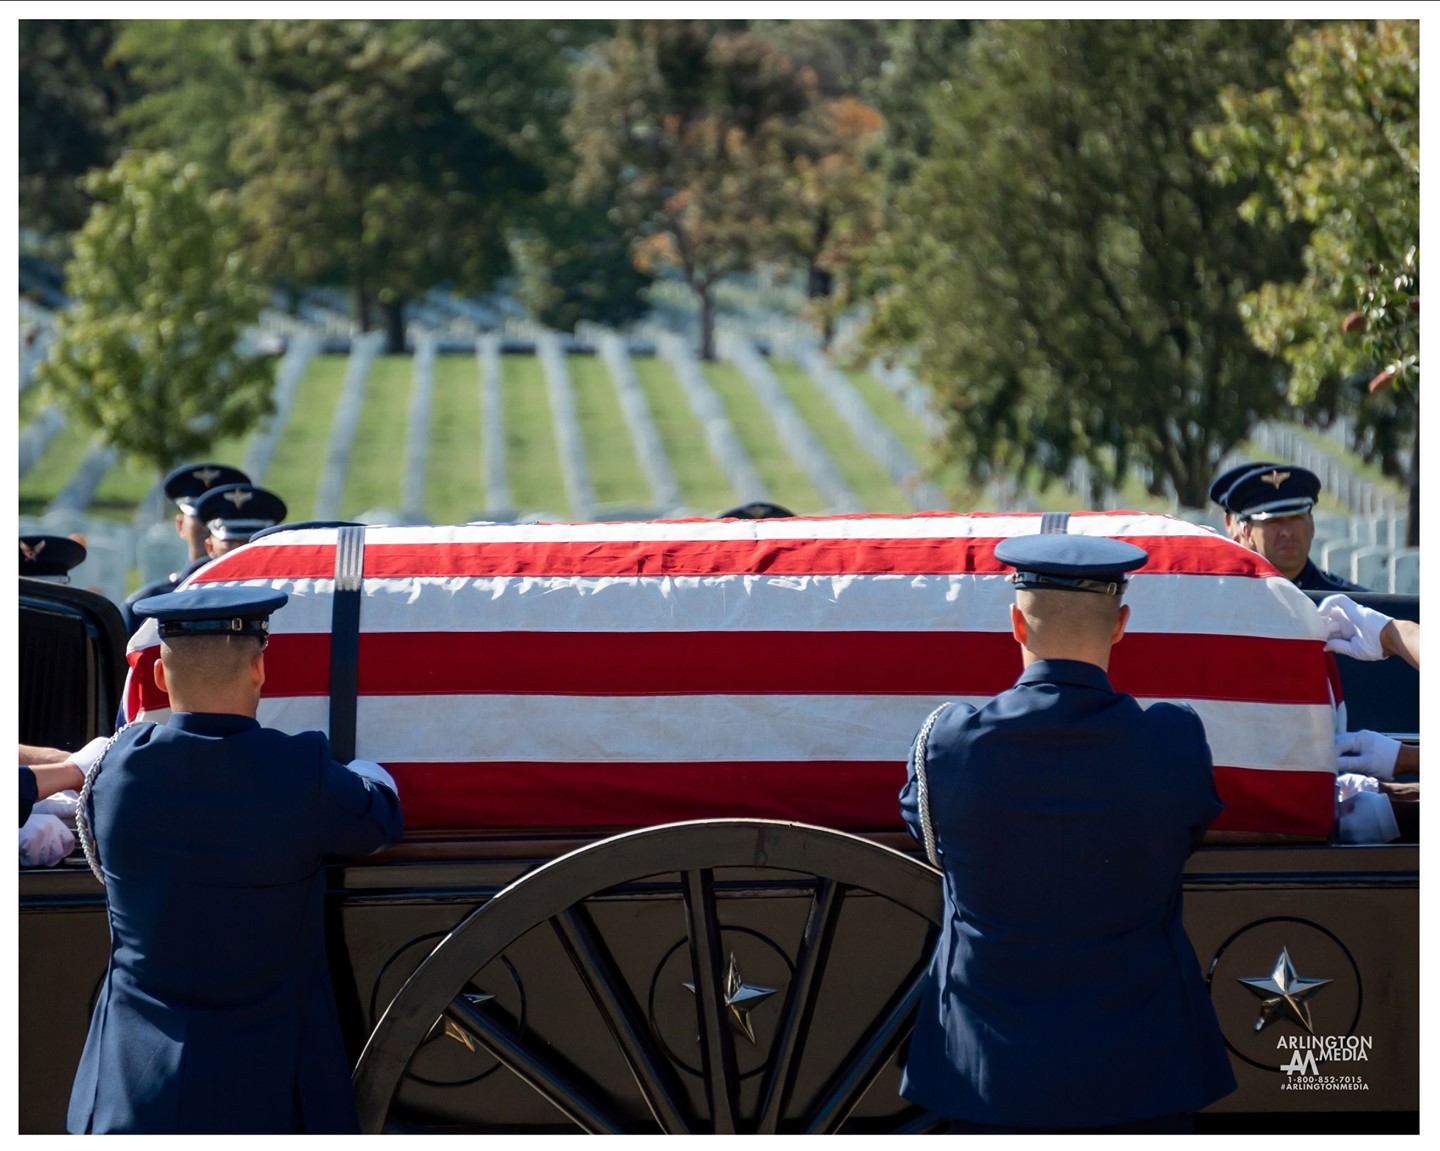 Airmen in the US Air Force carefully drape a flag over a casket on the caisson at Arlington National Cemetery.

These soldiers are preparing this casket for its final ride through the hallowed grounds of Arlington National Cemetery.  They do so with the utmost honor, dignity, and respect.